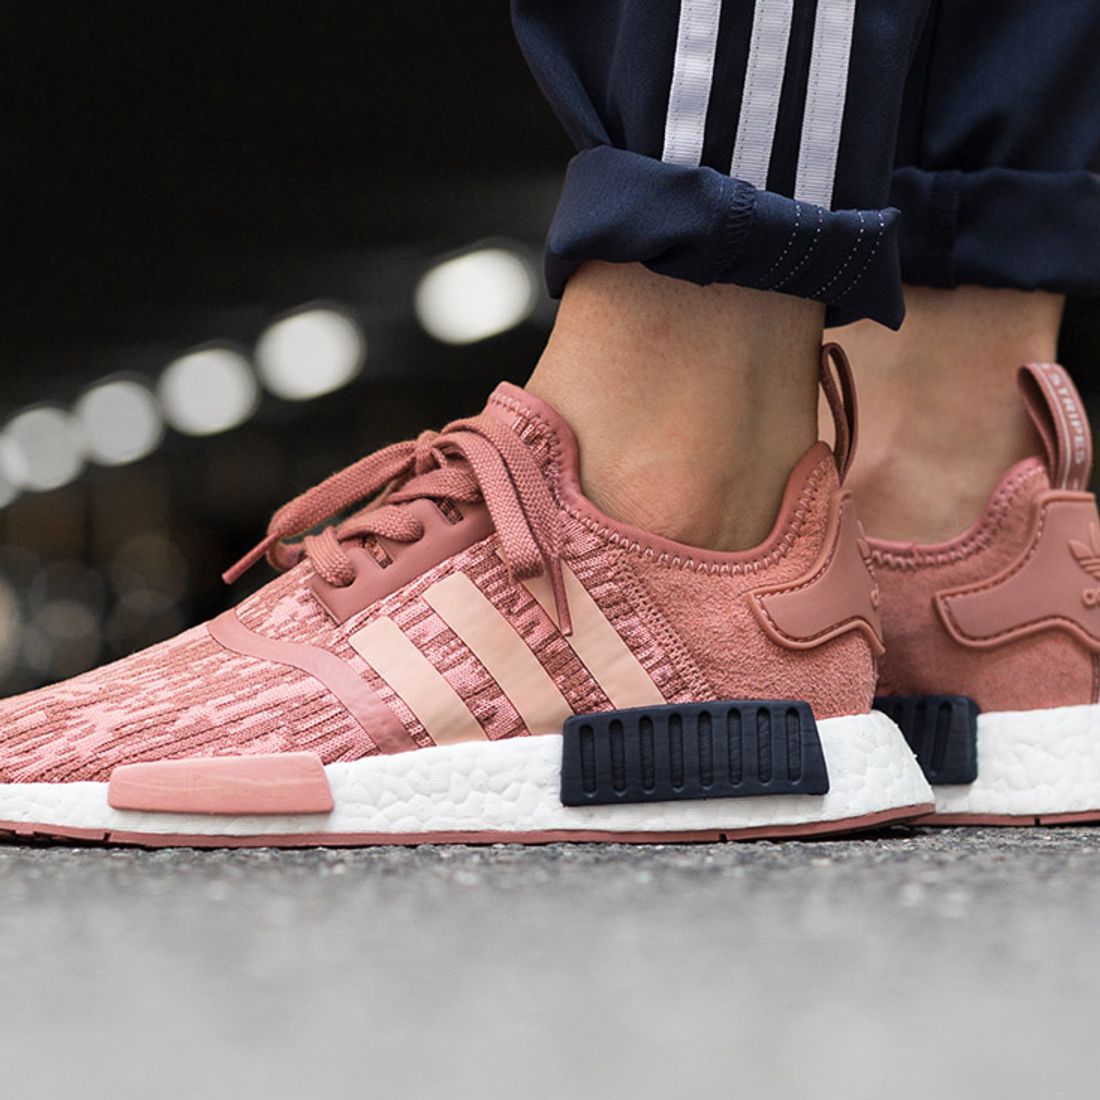 Ydmyge Fjord Palads adidas NMD_R1 Women's (Raw Pink) - Sneaker Freaker